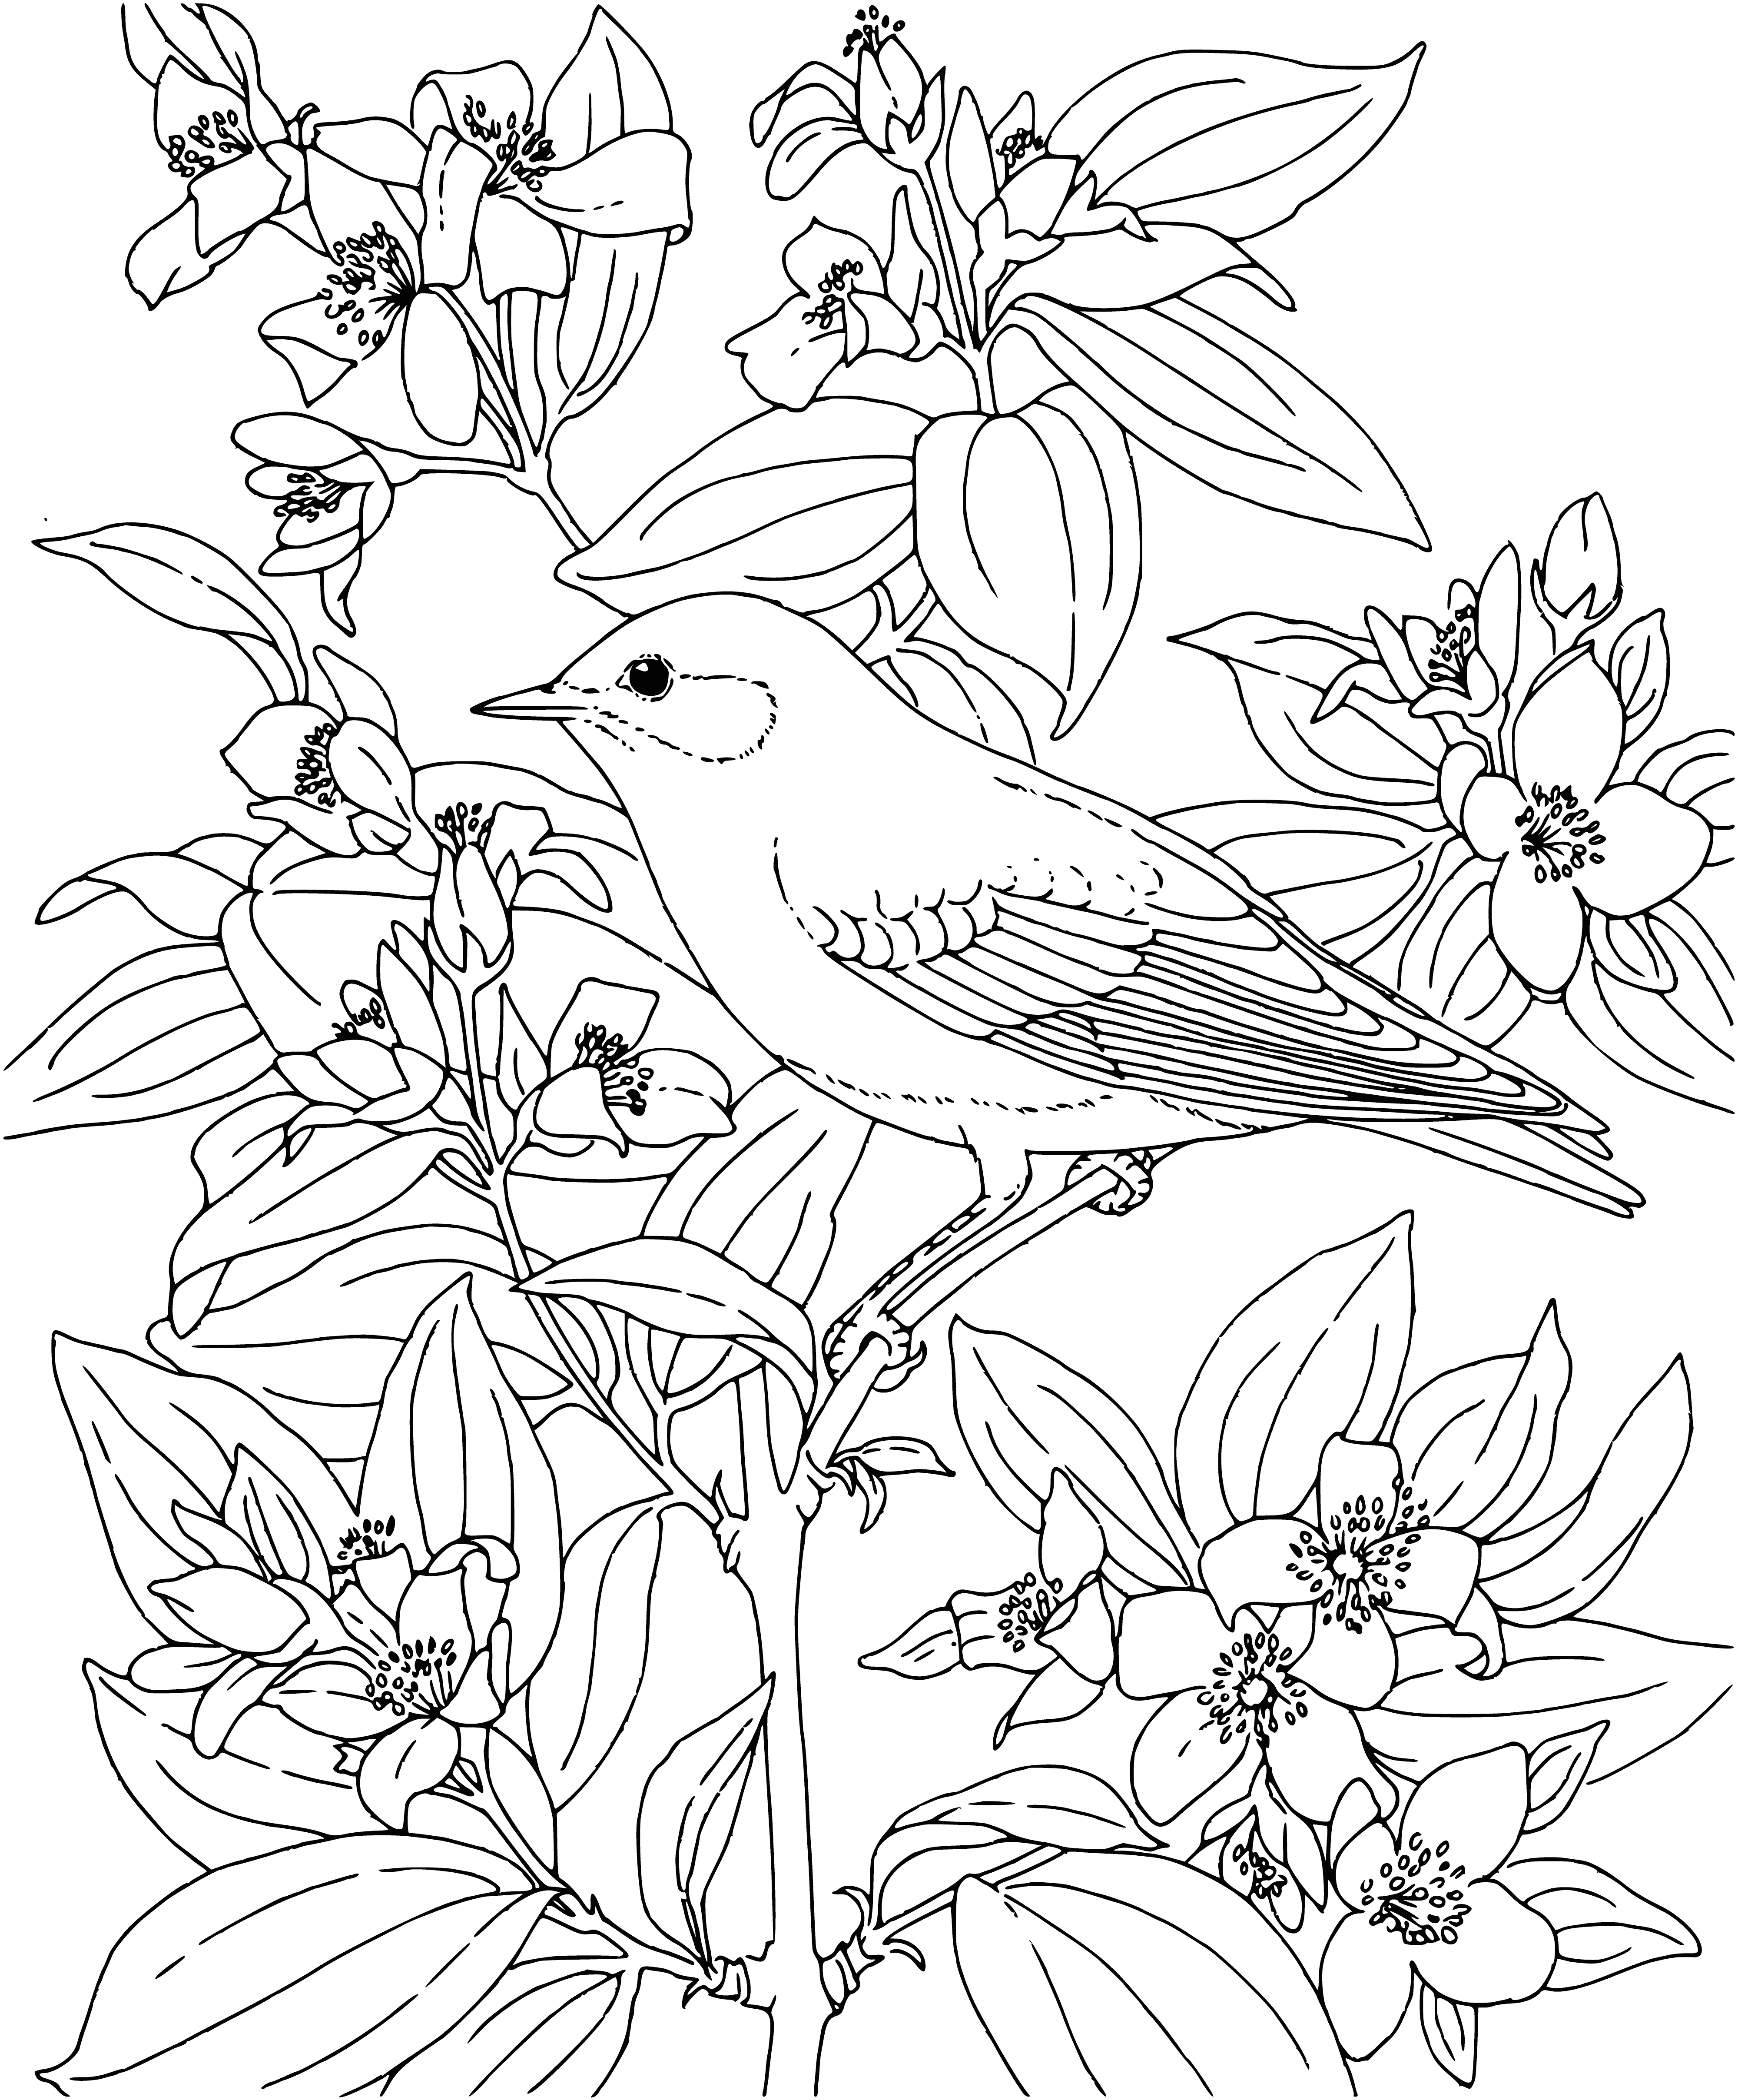 coloring page: Two birds of different sizes with yellow beaks coloring a page: one brown with white spots, one white.